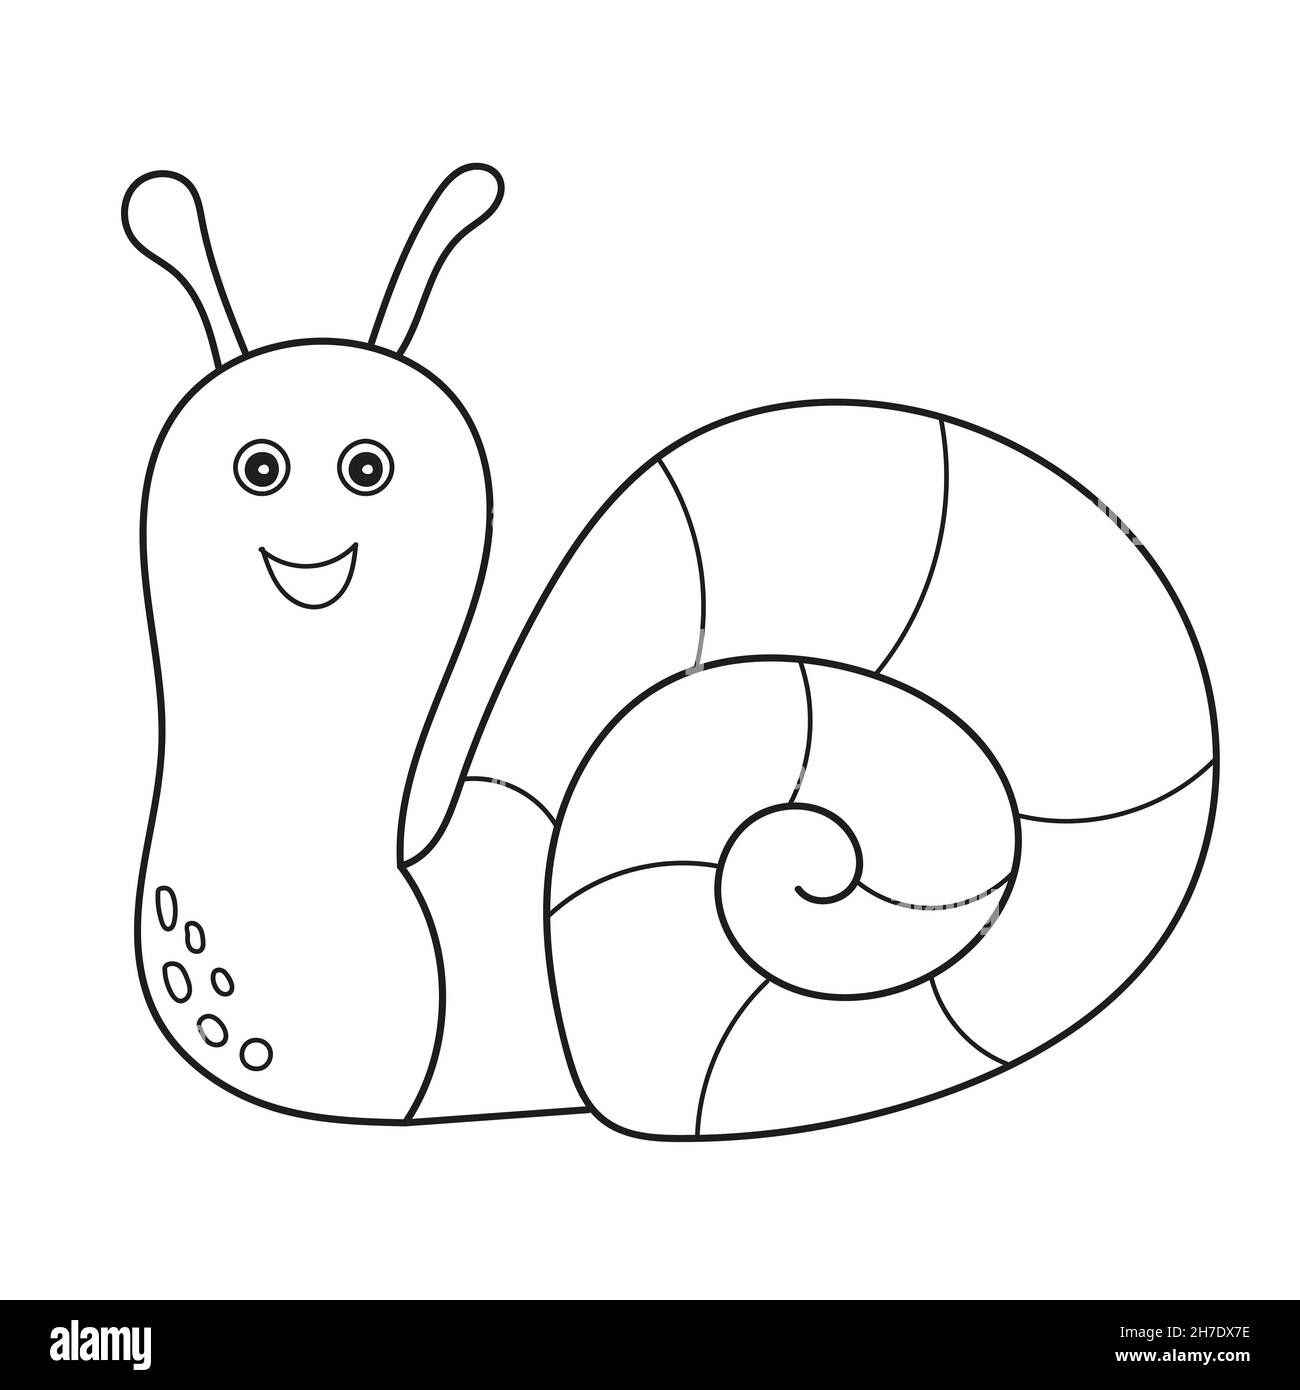 Simple coloring page little cute snail contour on white stock vector image art